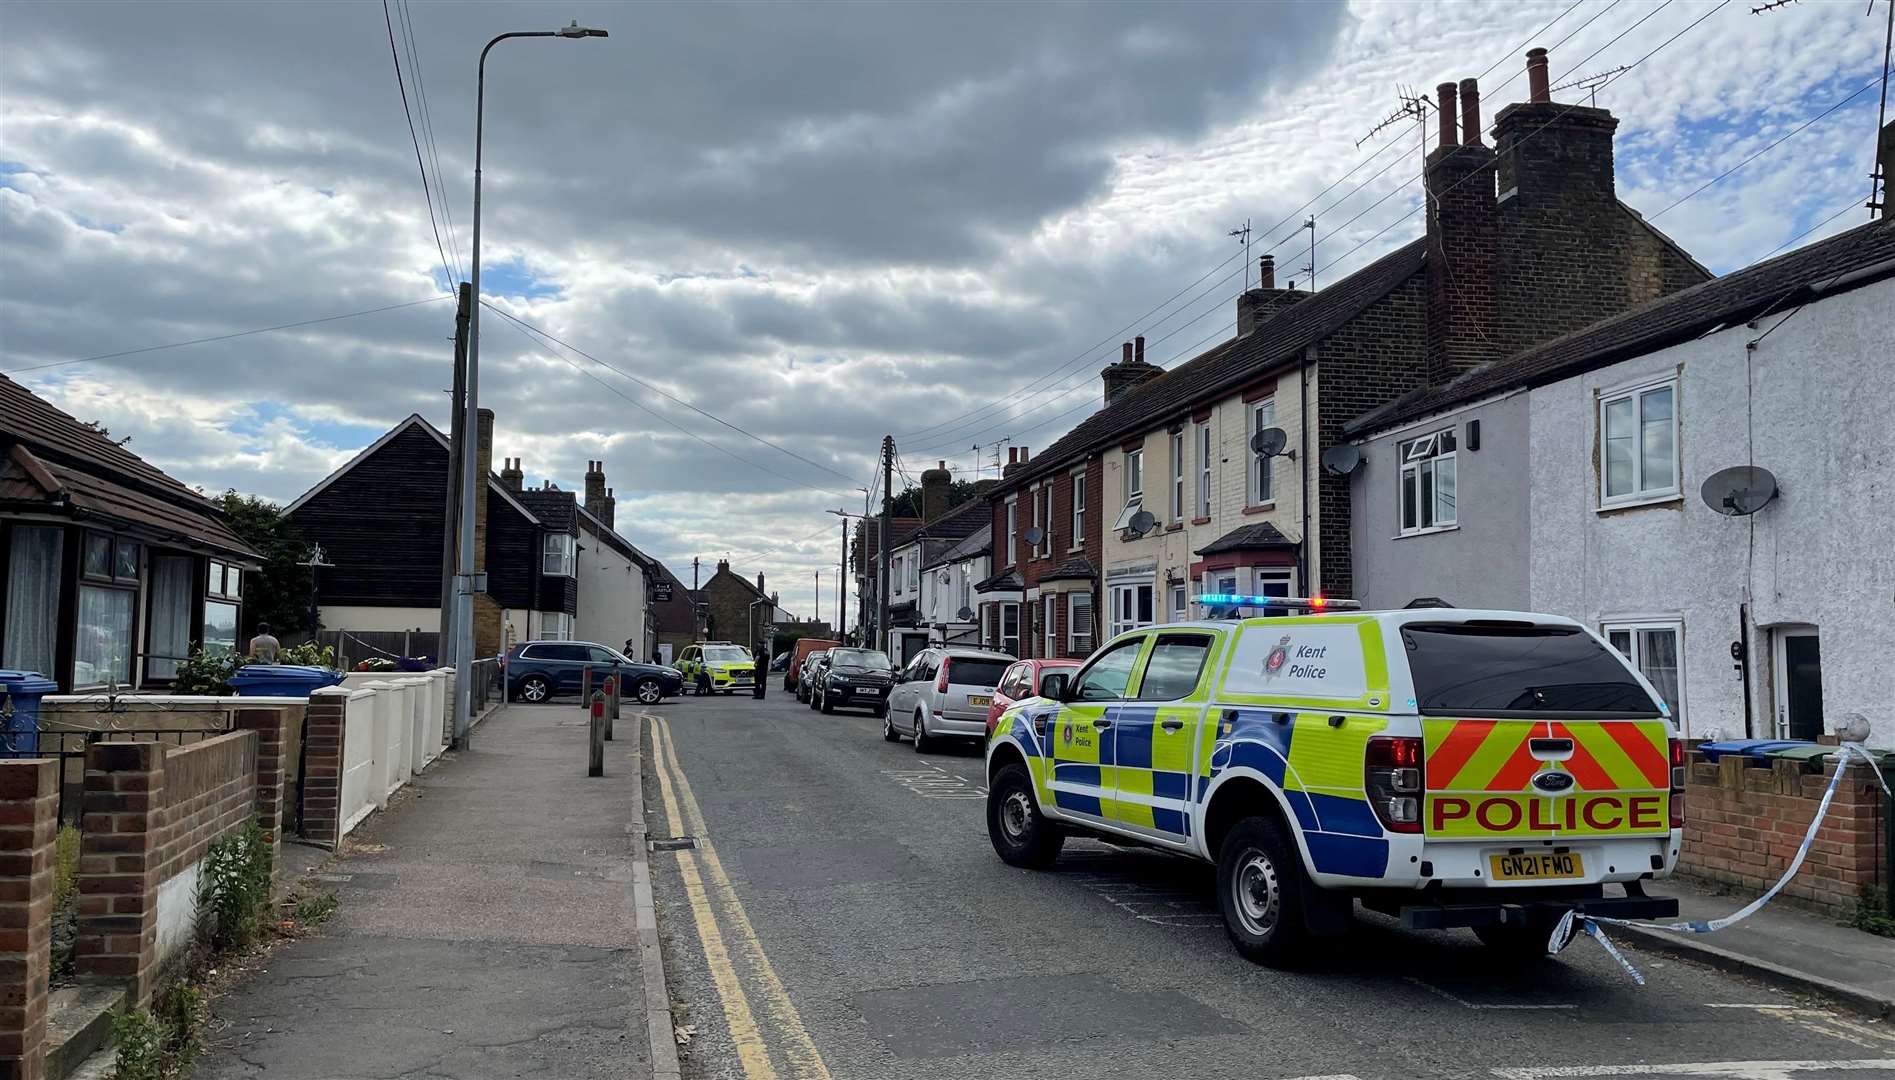 Firearms officers were called to the area after reports of someone with a weapon.